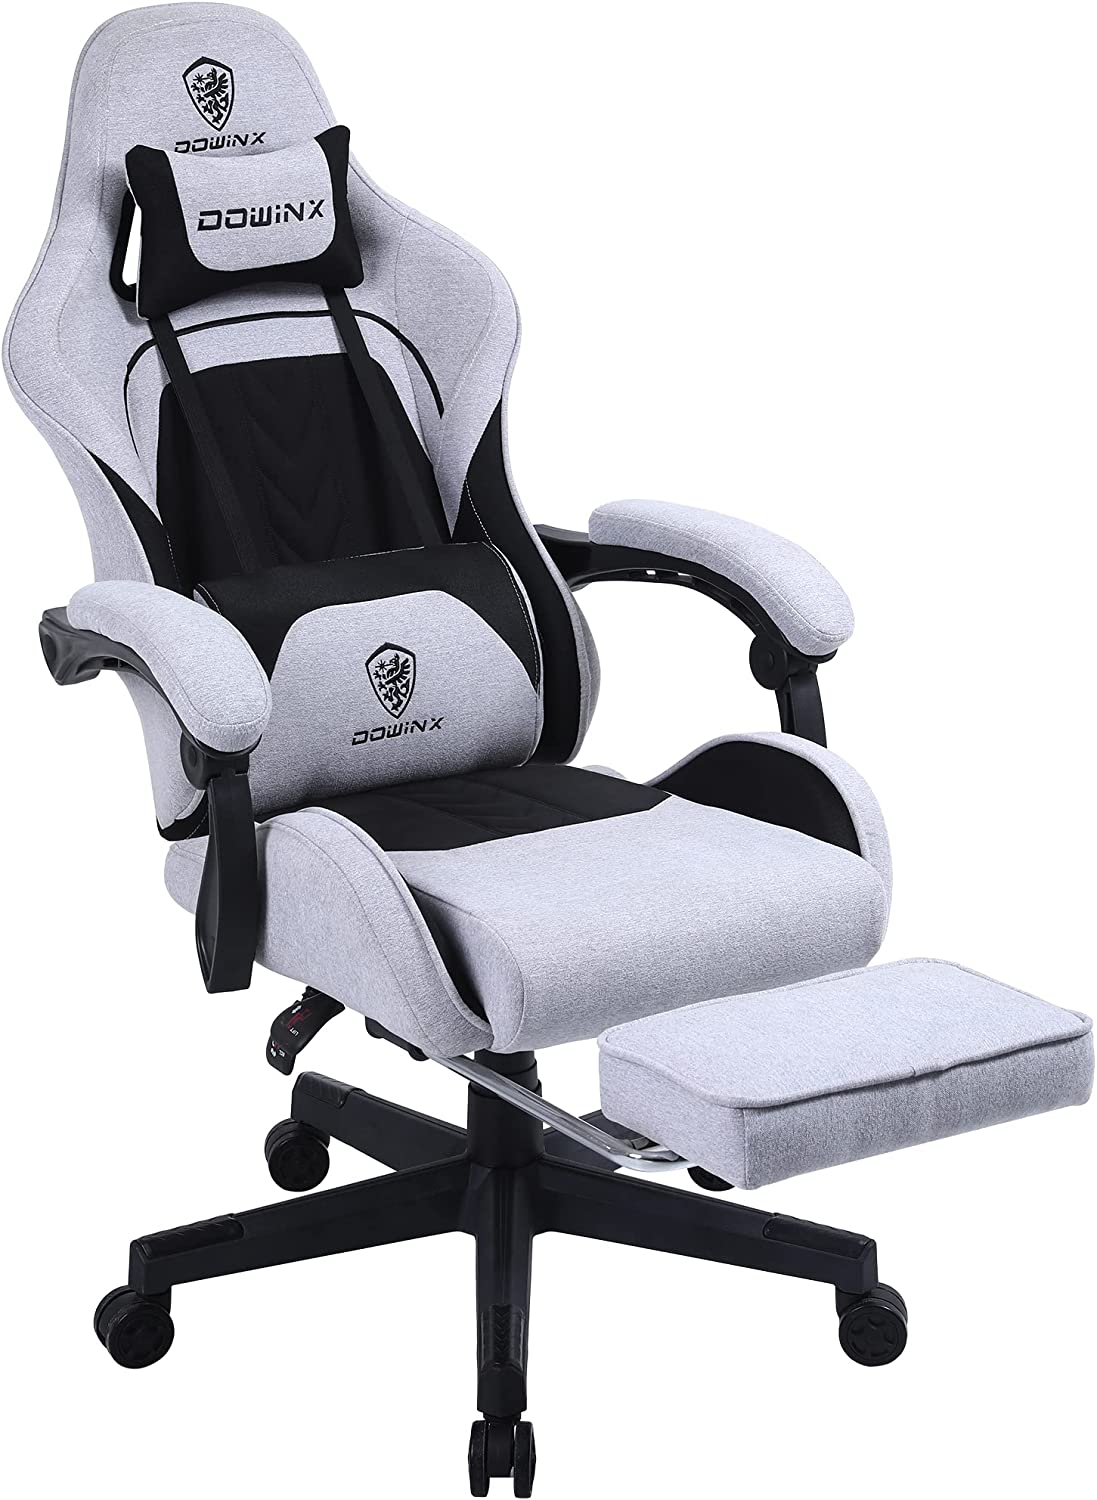 Dowinx Gaming Chair Fabric with Pocket Spring Cushion Black&Grey – DOWINX  GAMING CHAIR